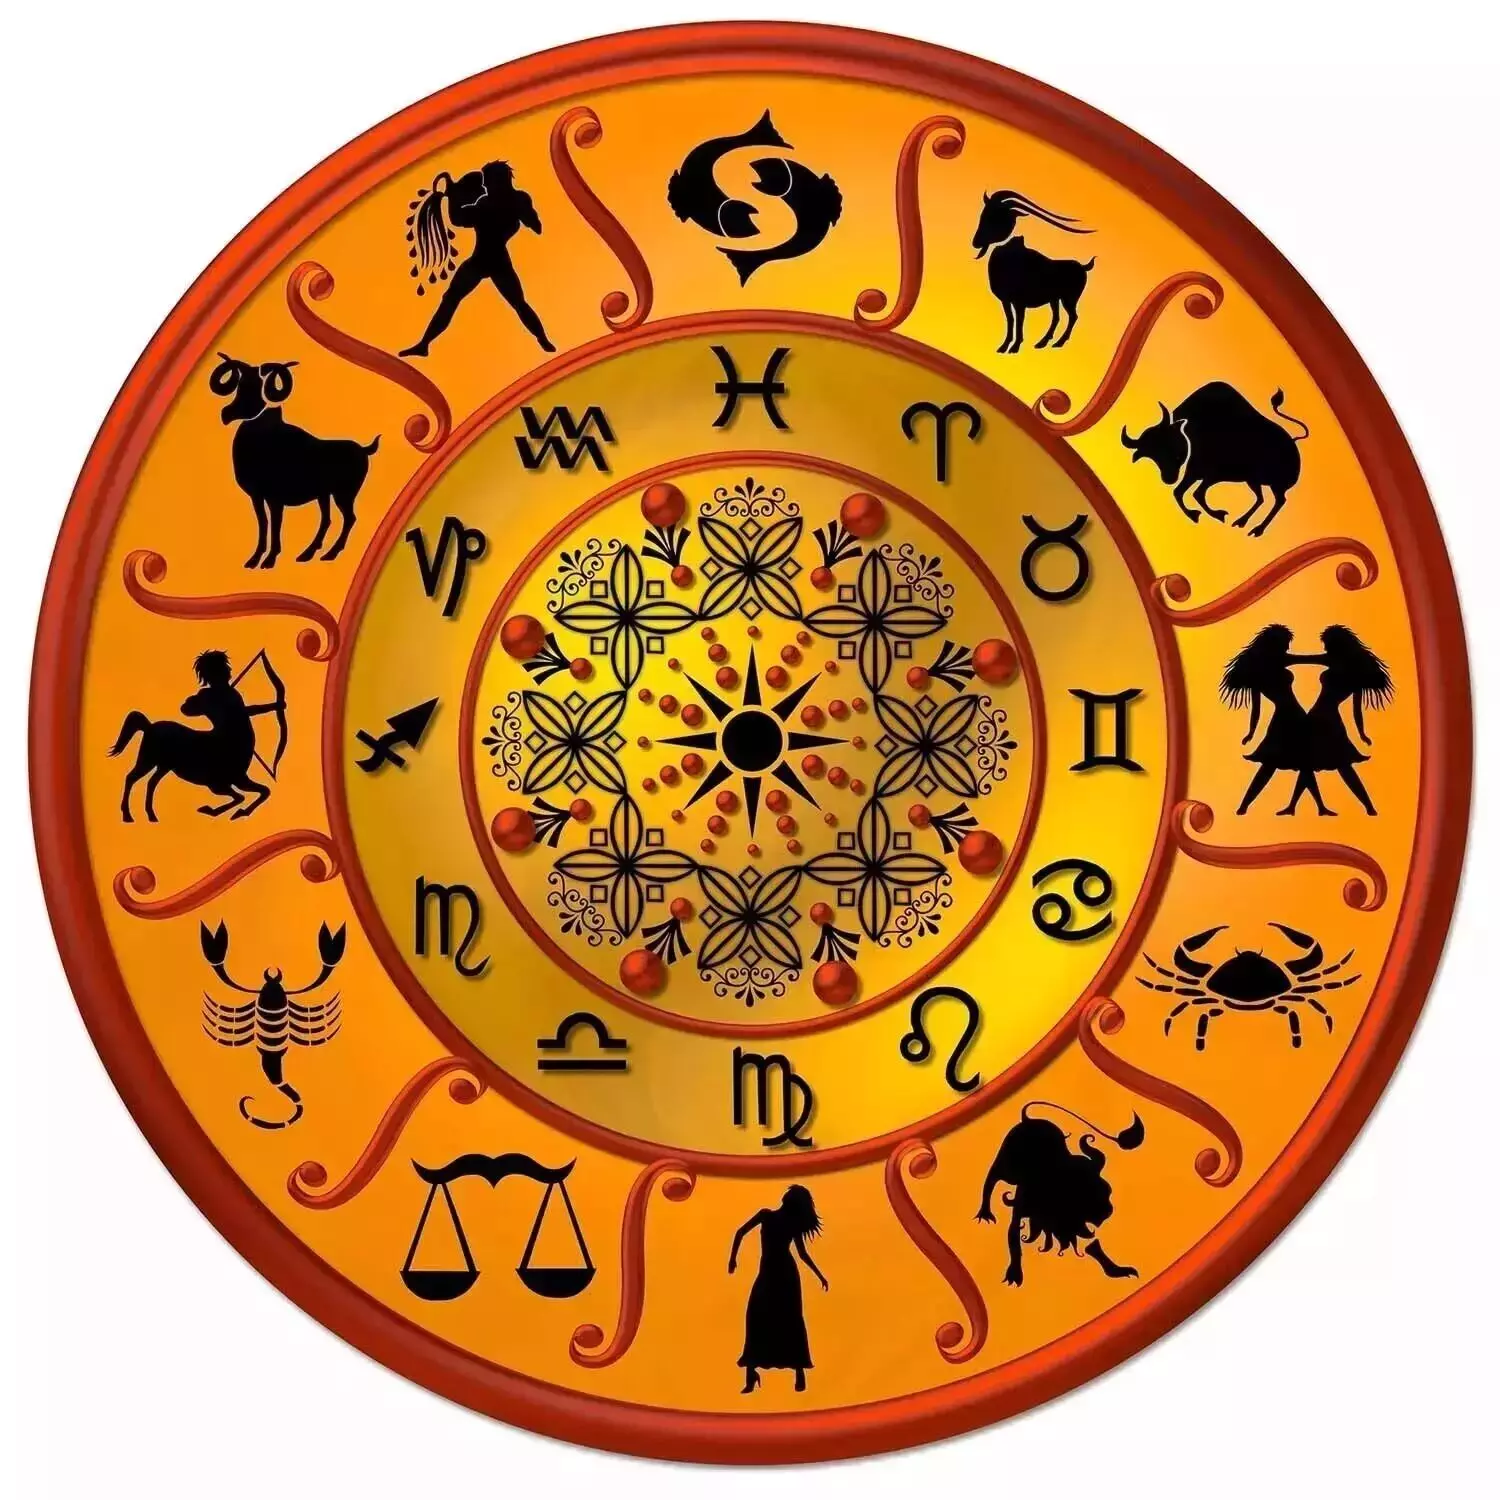 30 January – Know your todays horoscope